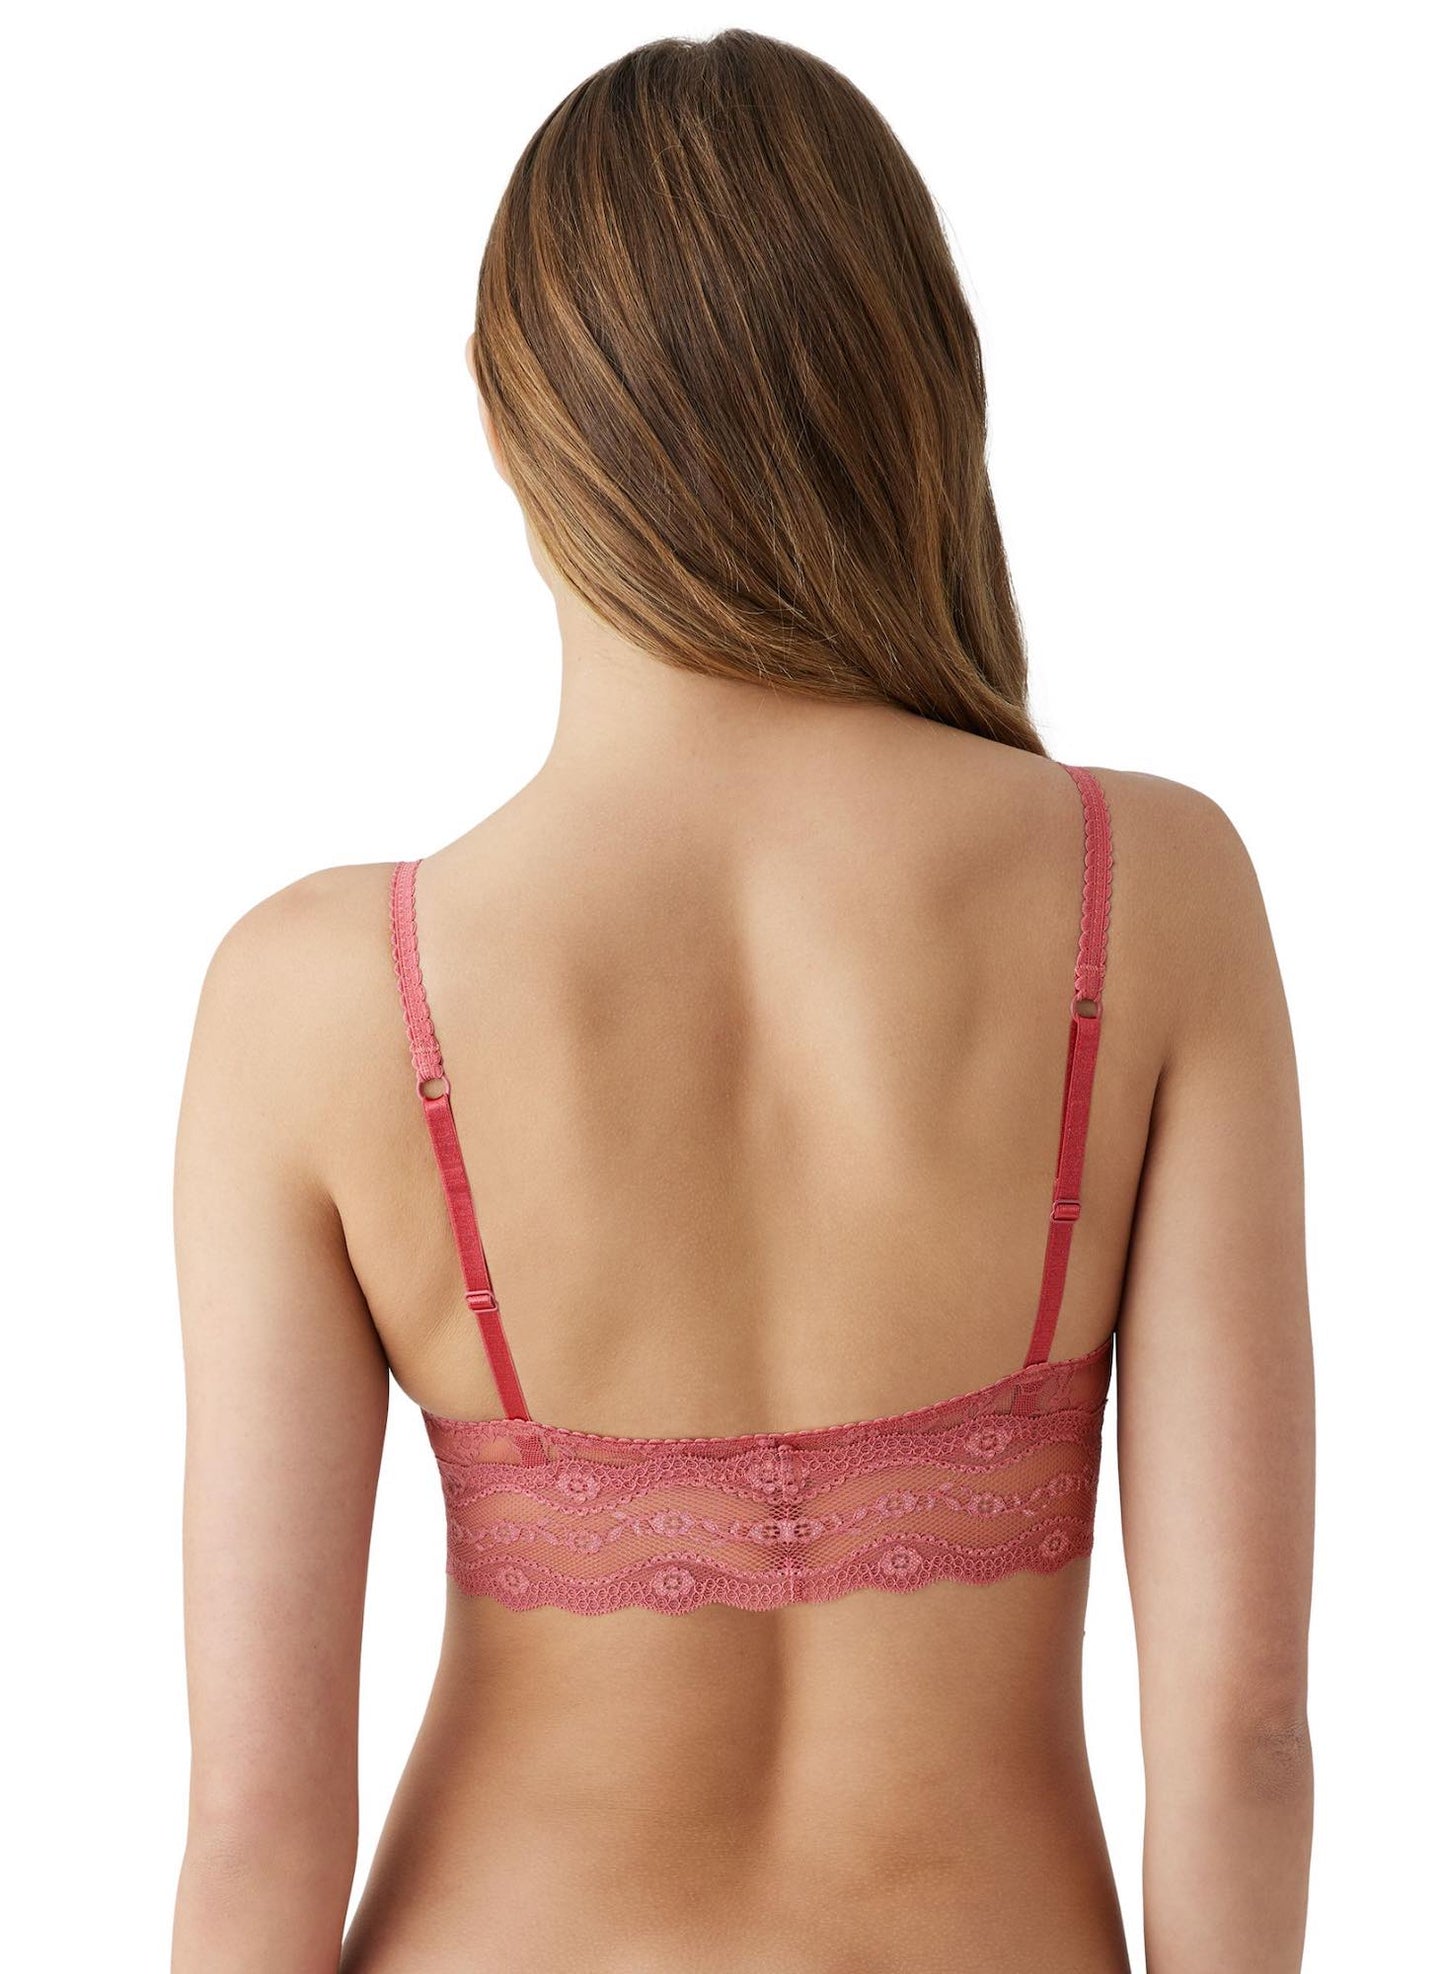 Lace Kiss bralette - new early fall color